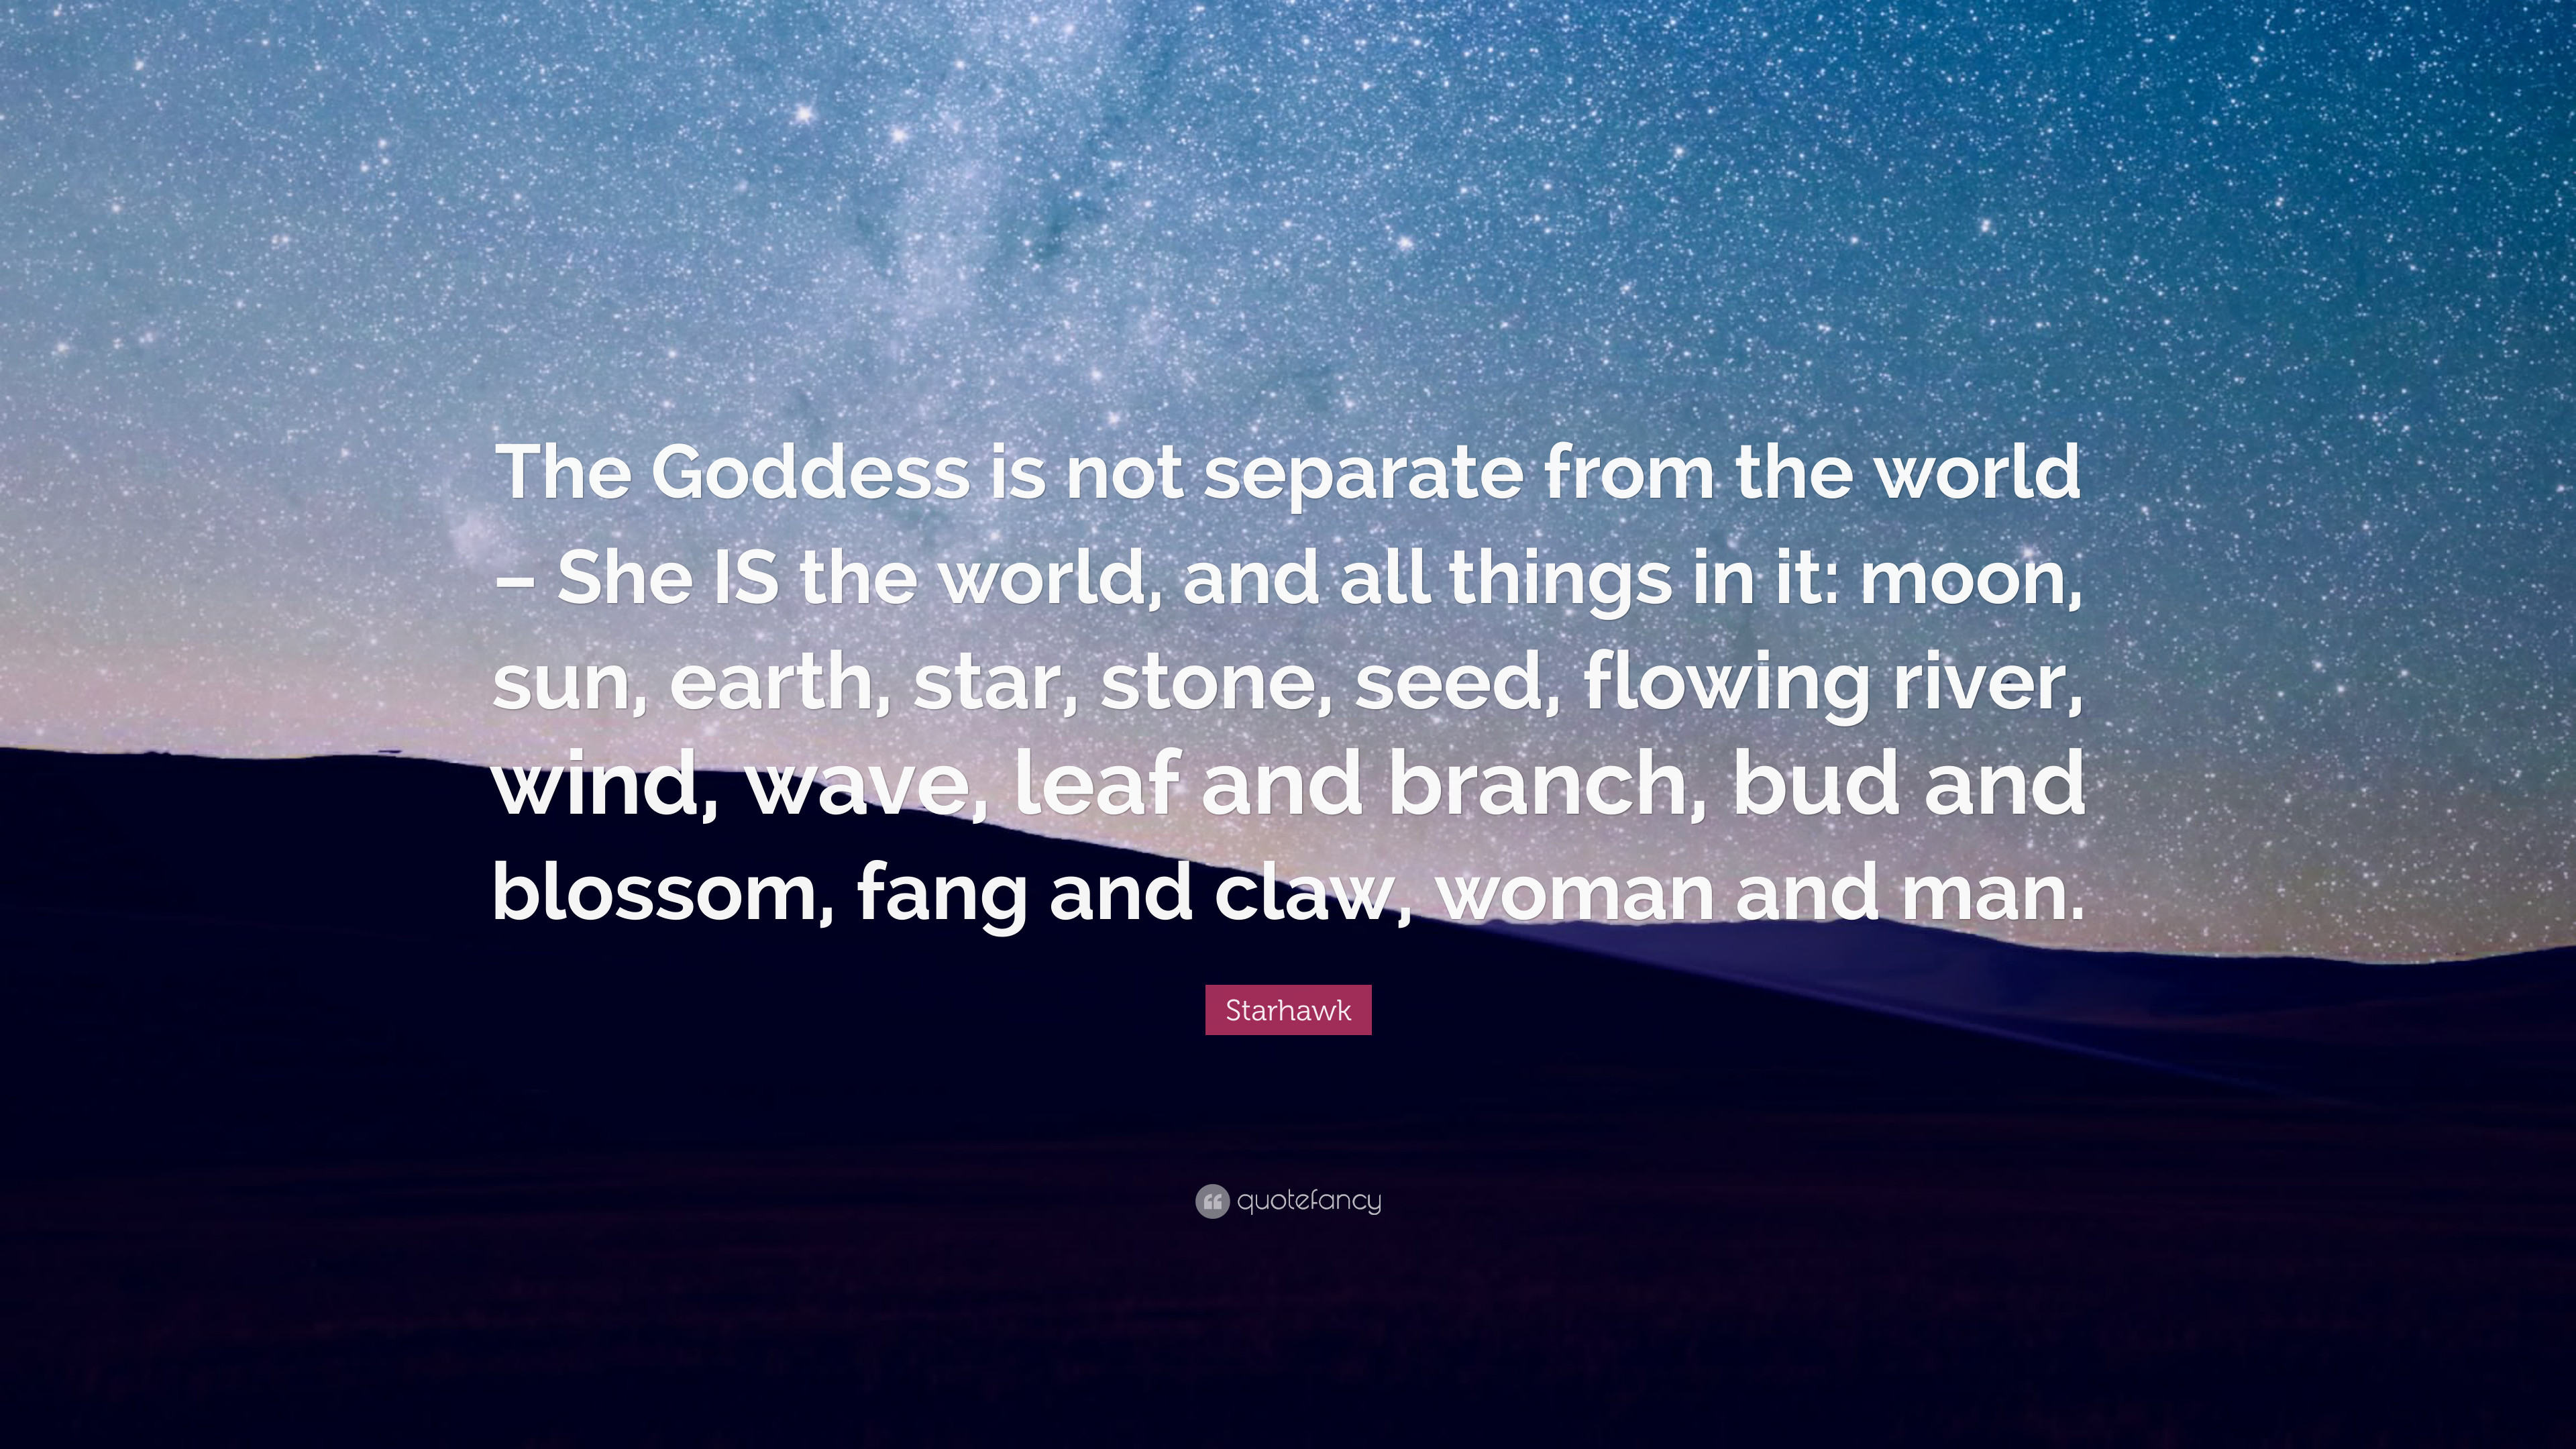 3840x2160 Starhawk Quote: “The Goddess is not separate from the world – She IS the